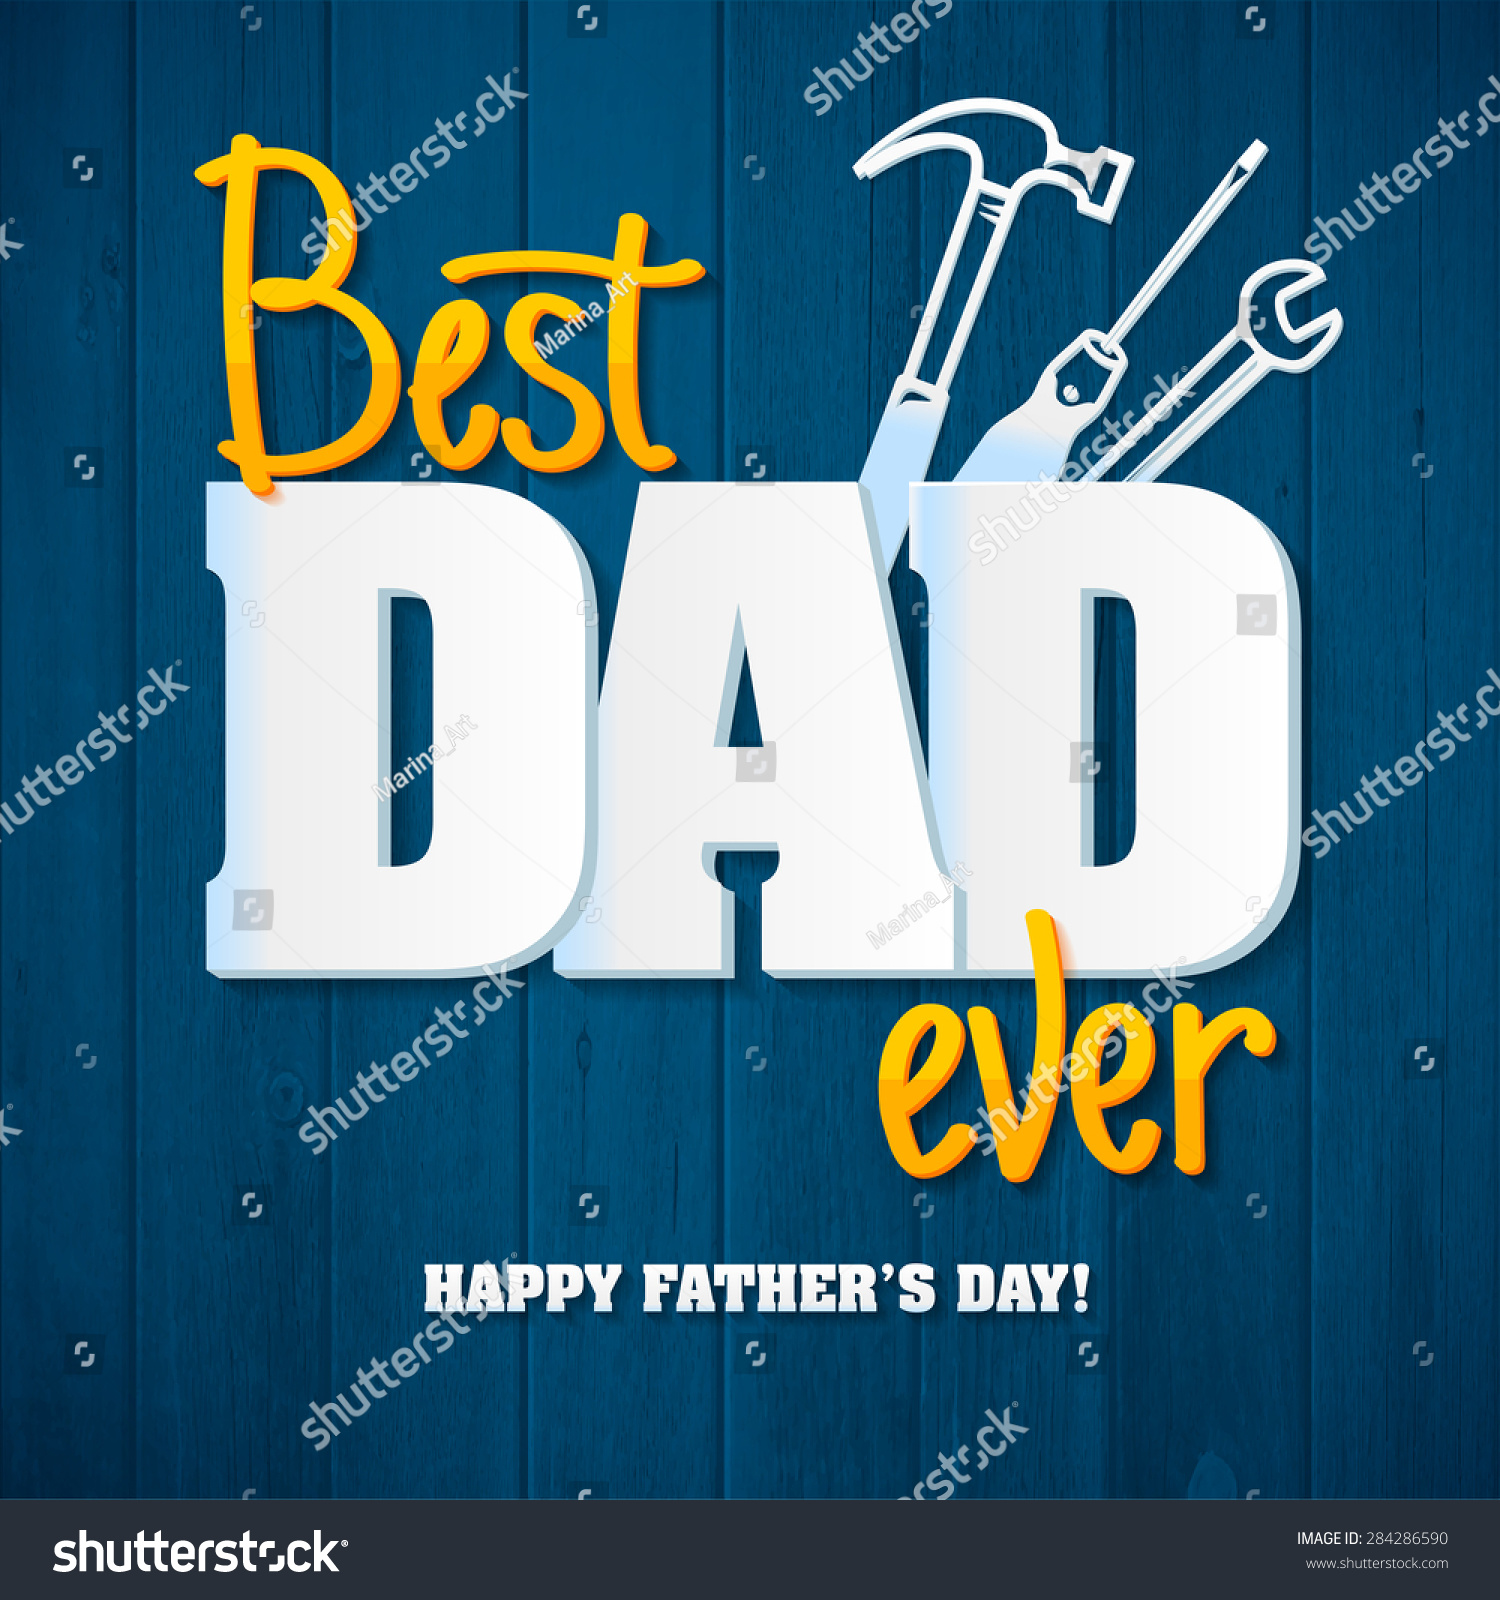 Tools father Images, Stock Photos & Vectors | Shutterstock